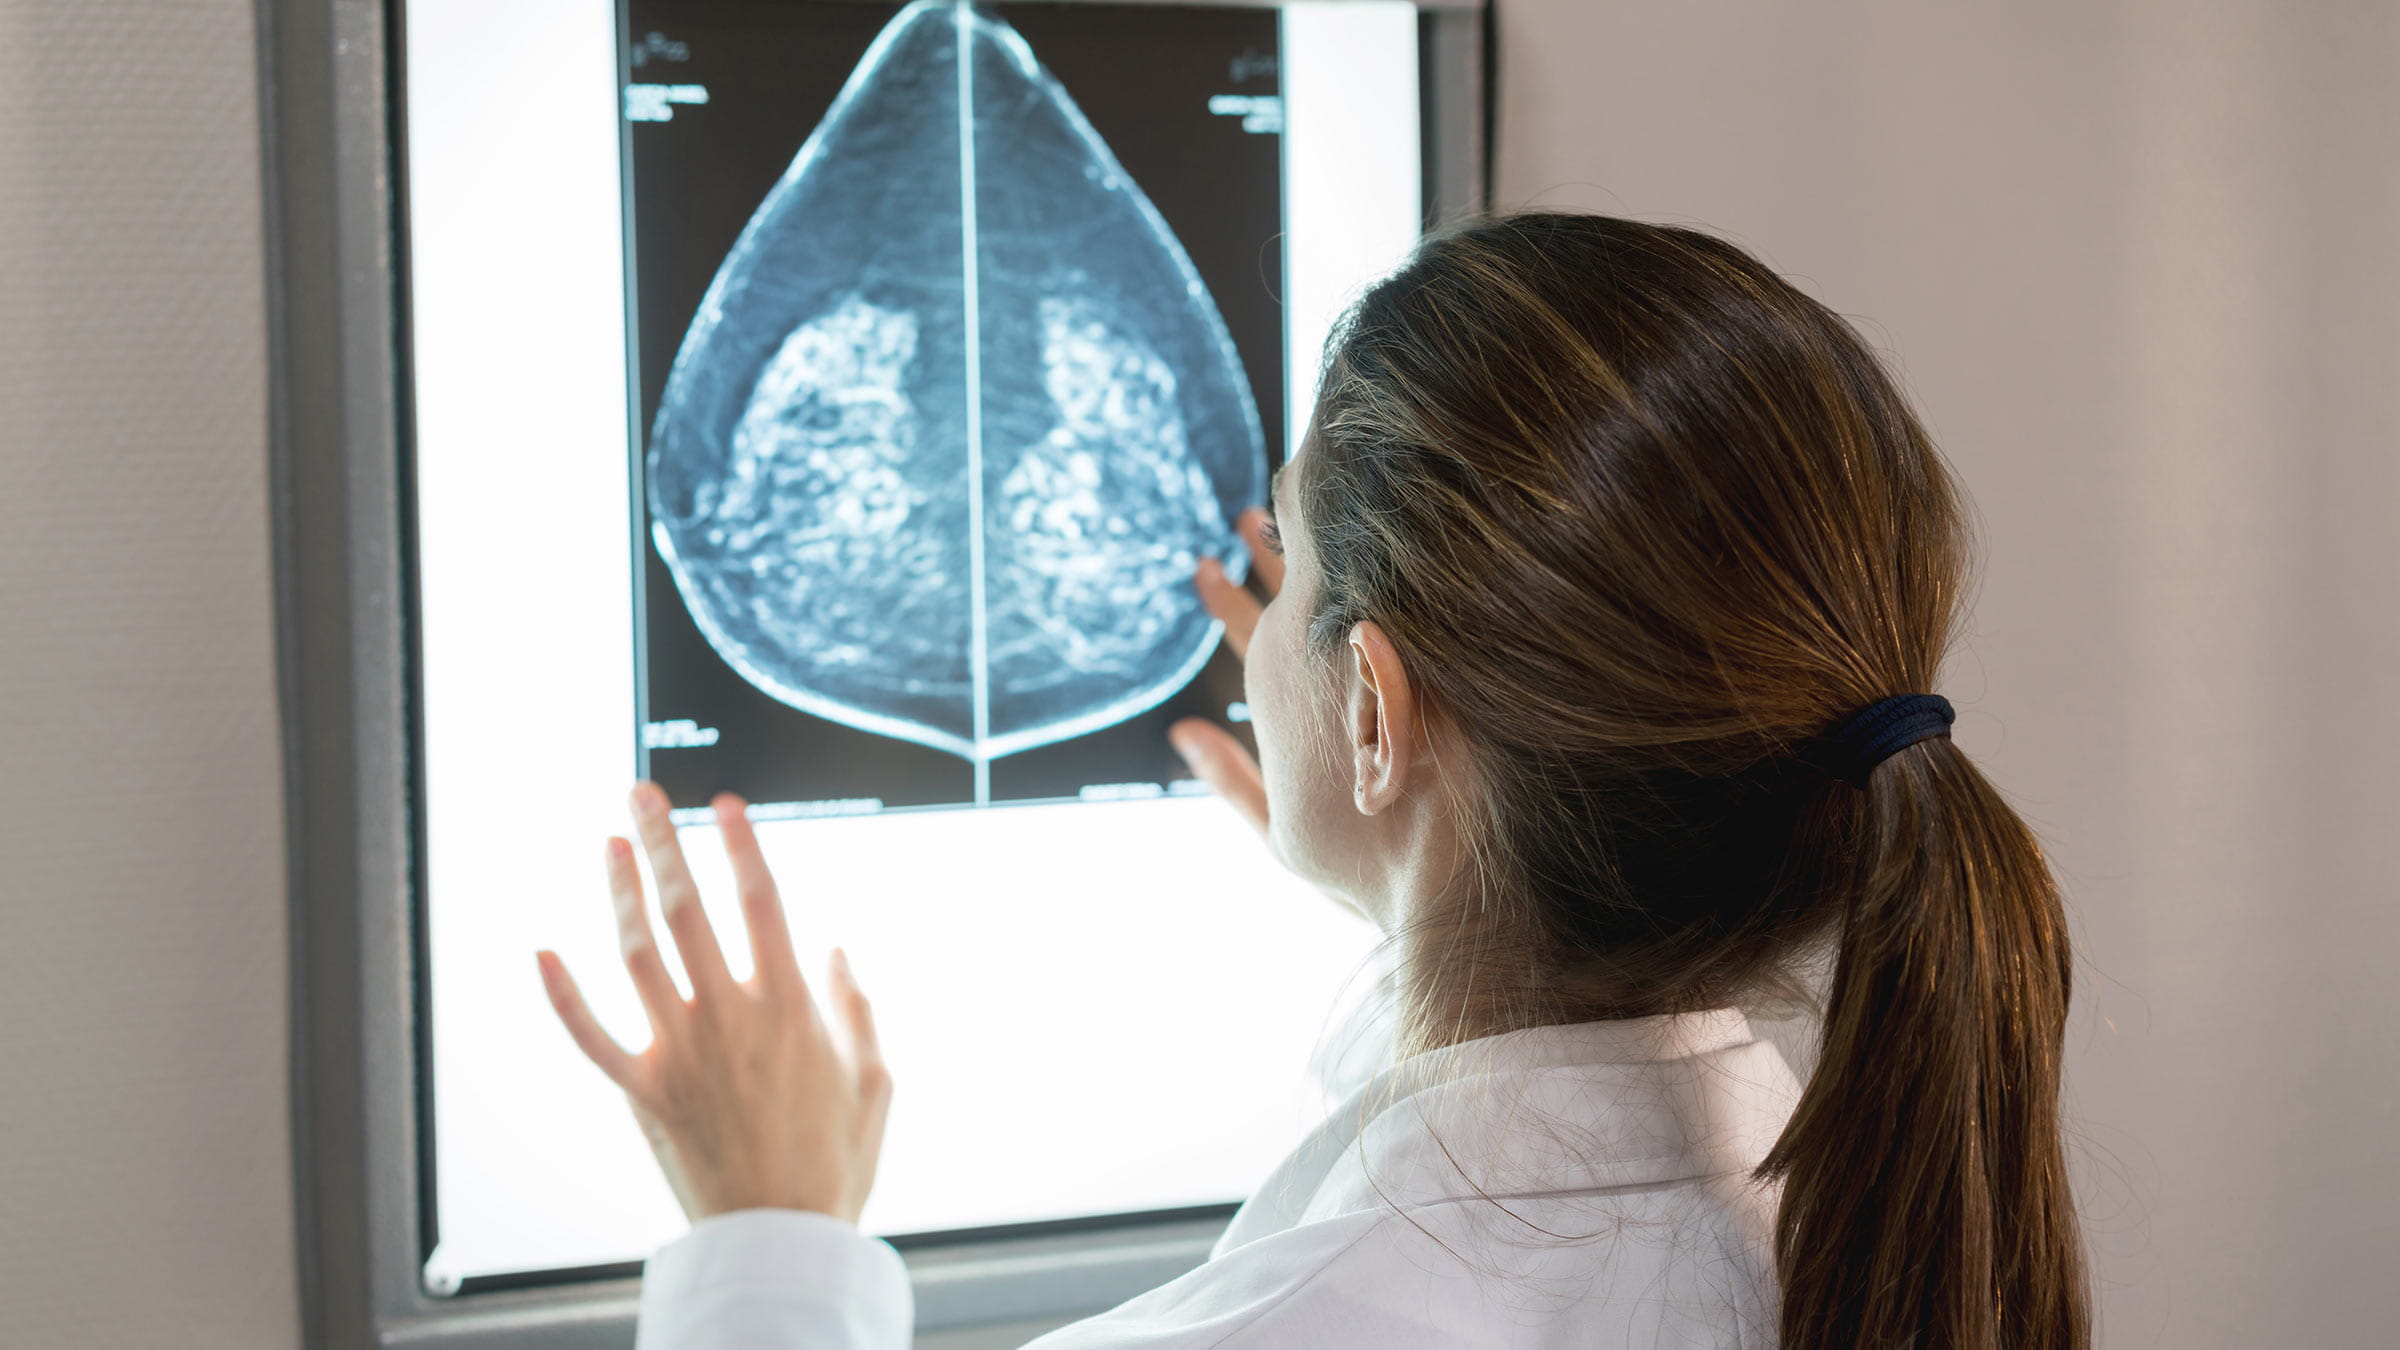 Are you clear about dense breast tissue? Take our quiz to find out